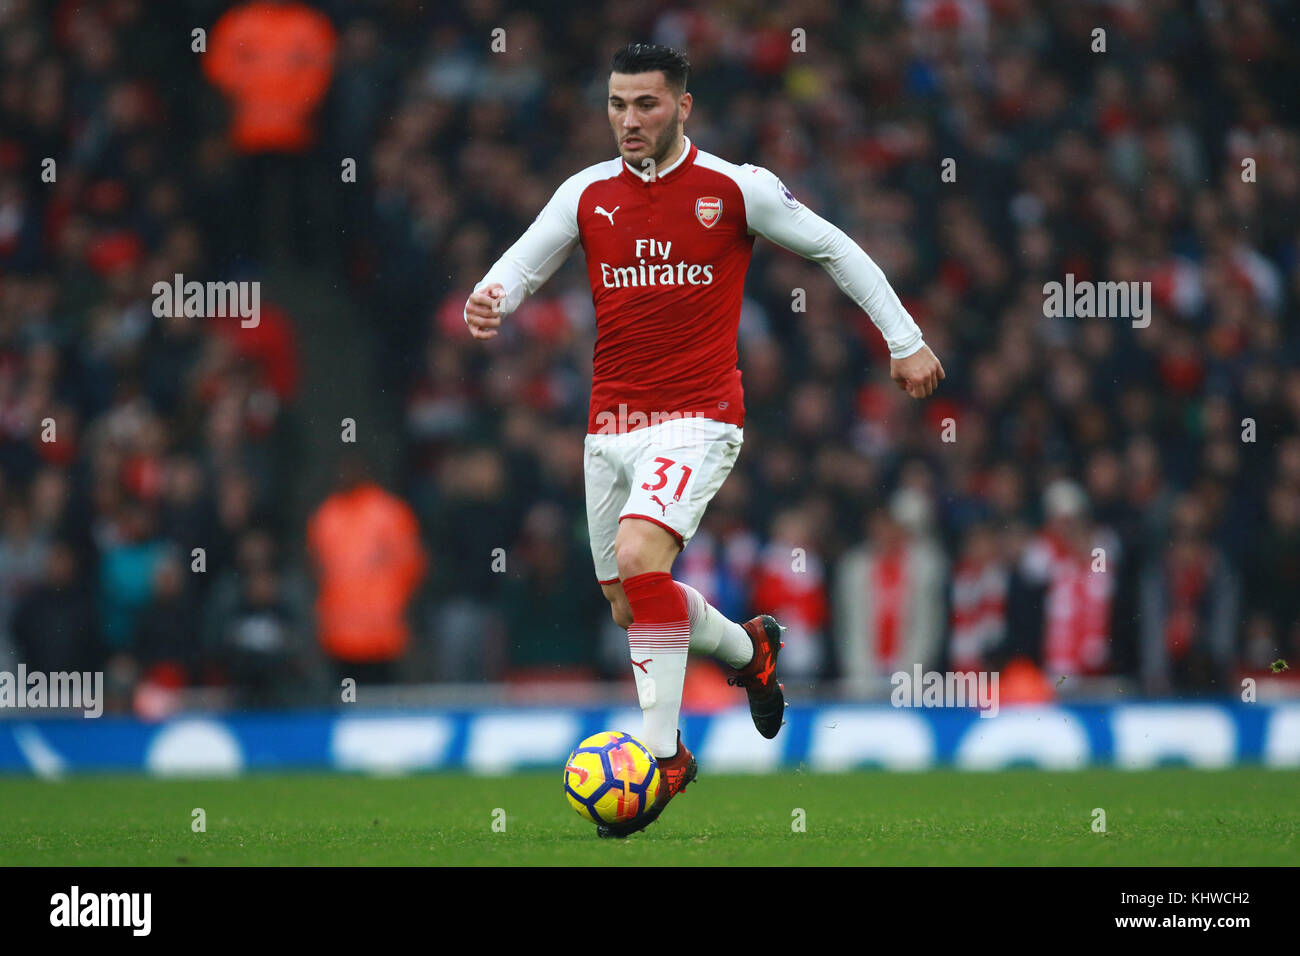 Sead Kolasinac (A) at the Arsenal v Tottenham Hotspur English Premier League match at The Emirates Stadium, London, on November 18, 2017. **This picture is intended for editorial use only** Stock Photo